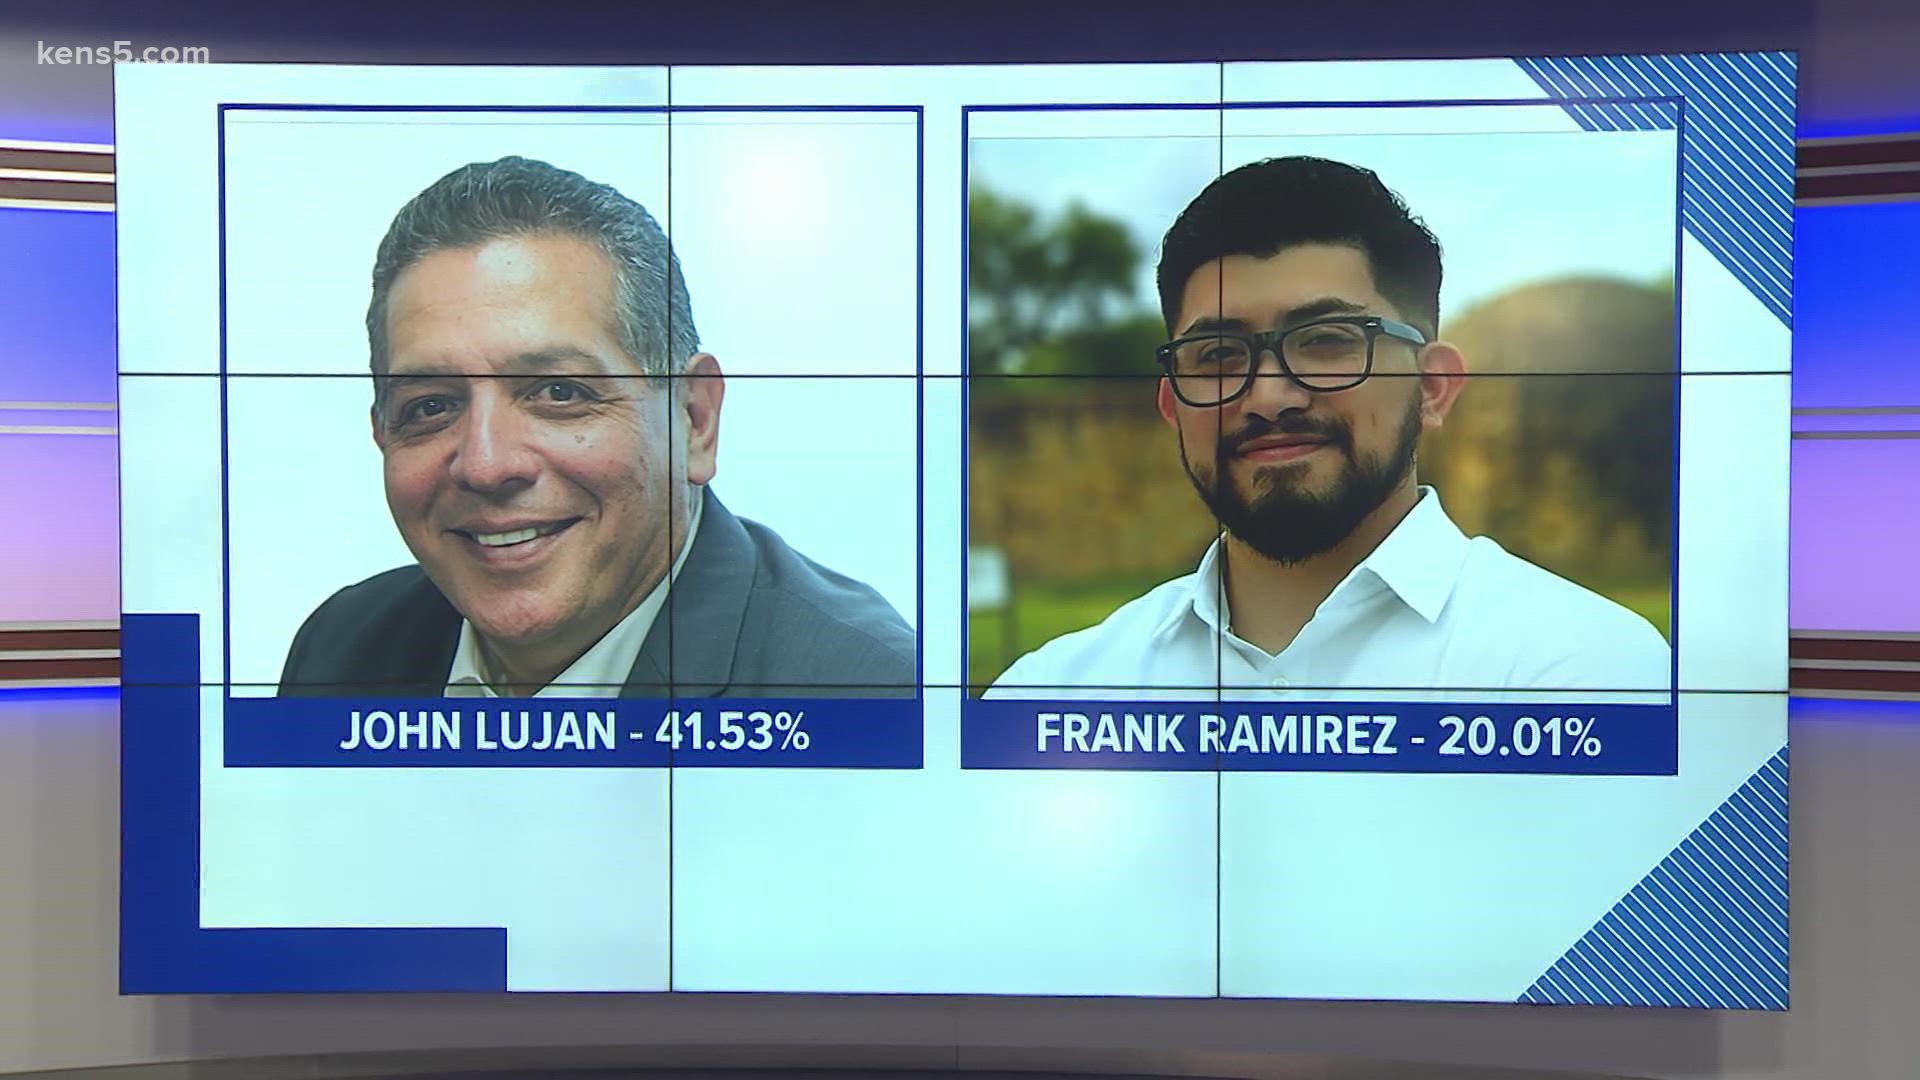 John Lujan and Frank Ramirez are heading to a runoff after none of the candidates exceeded 50 percent of the vote during Tuesday's special election.